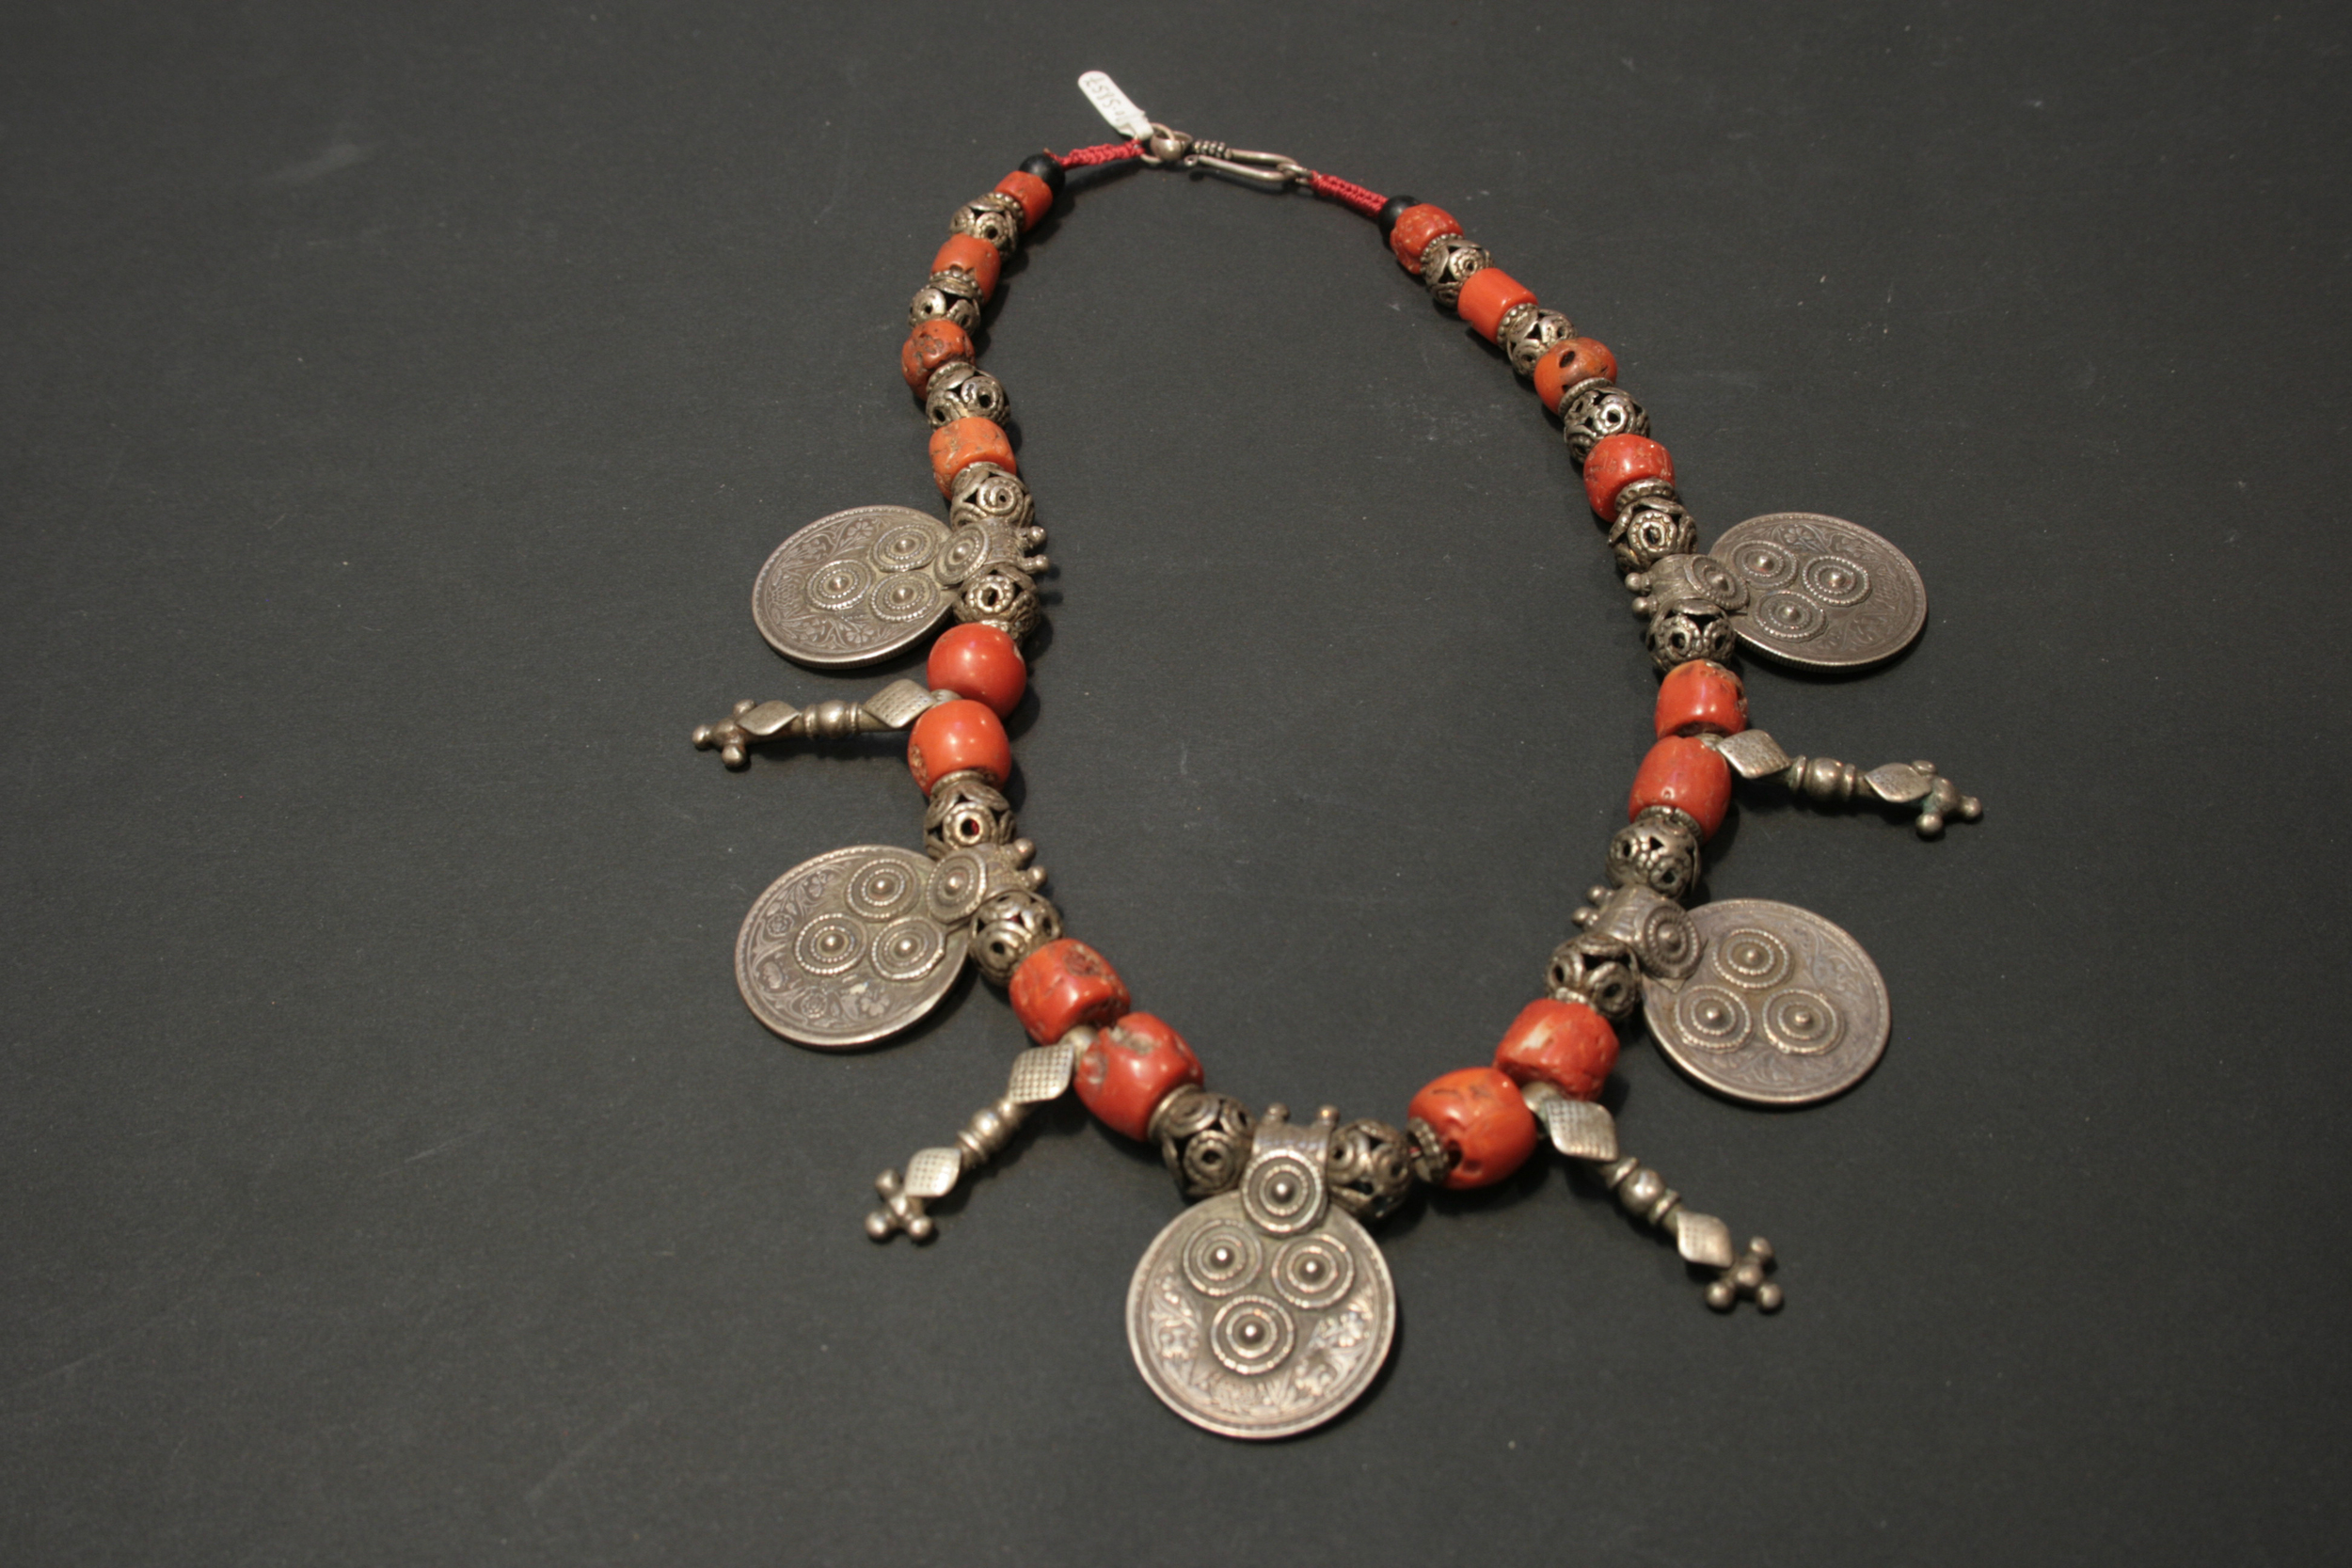 Tribal Tent designed coin necklace